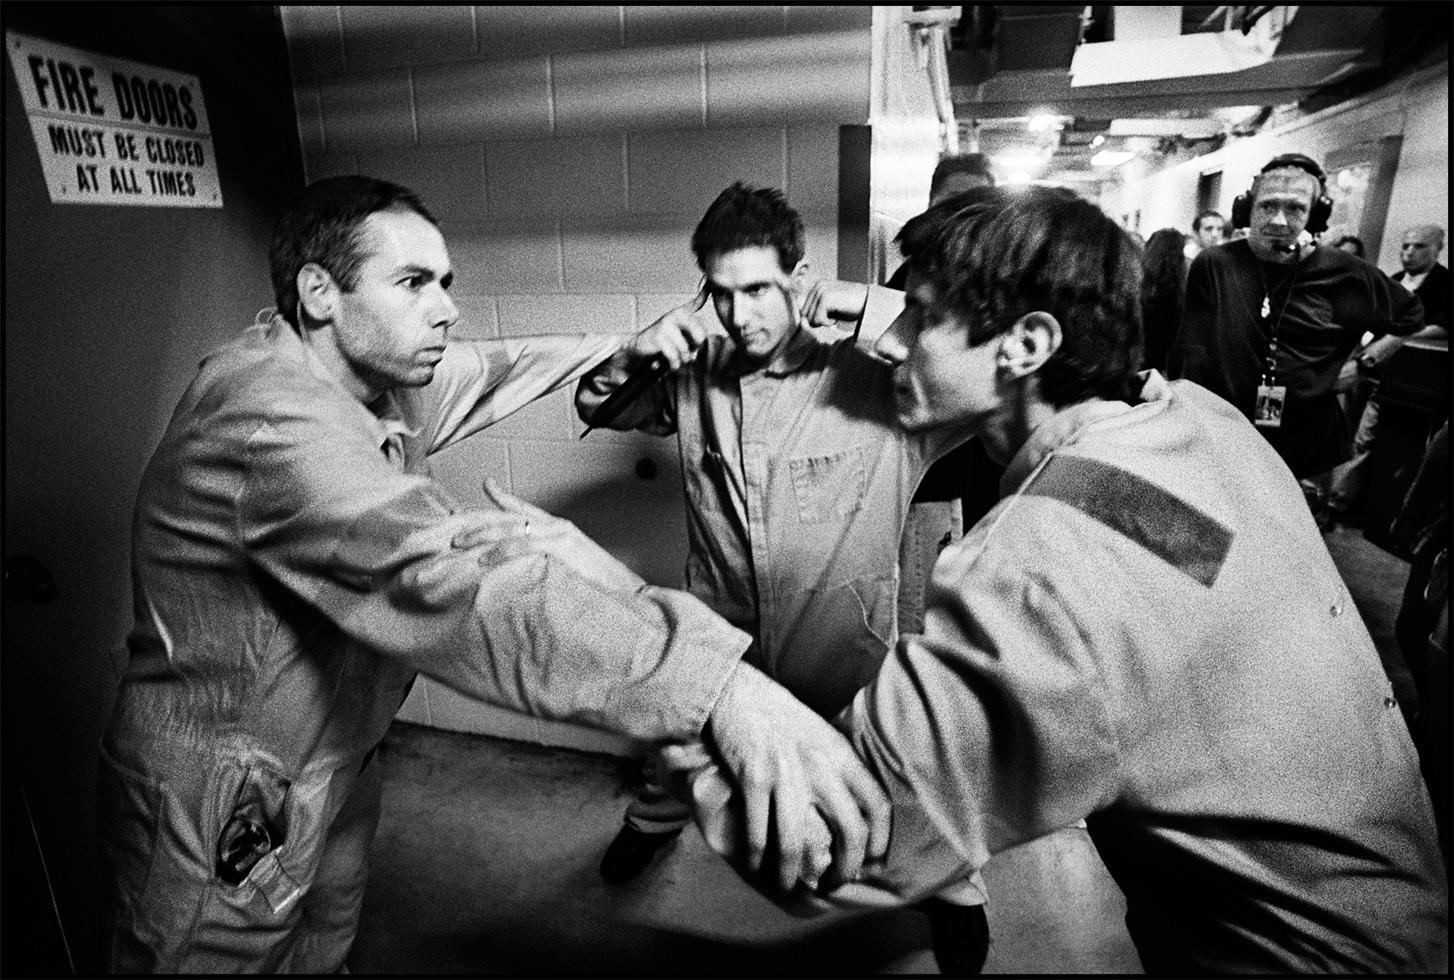 Danny Clinch Black and White Photograph - Beastie Boys, Los Angeles, CA 1998